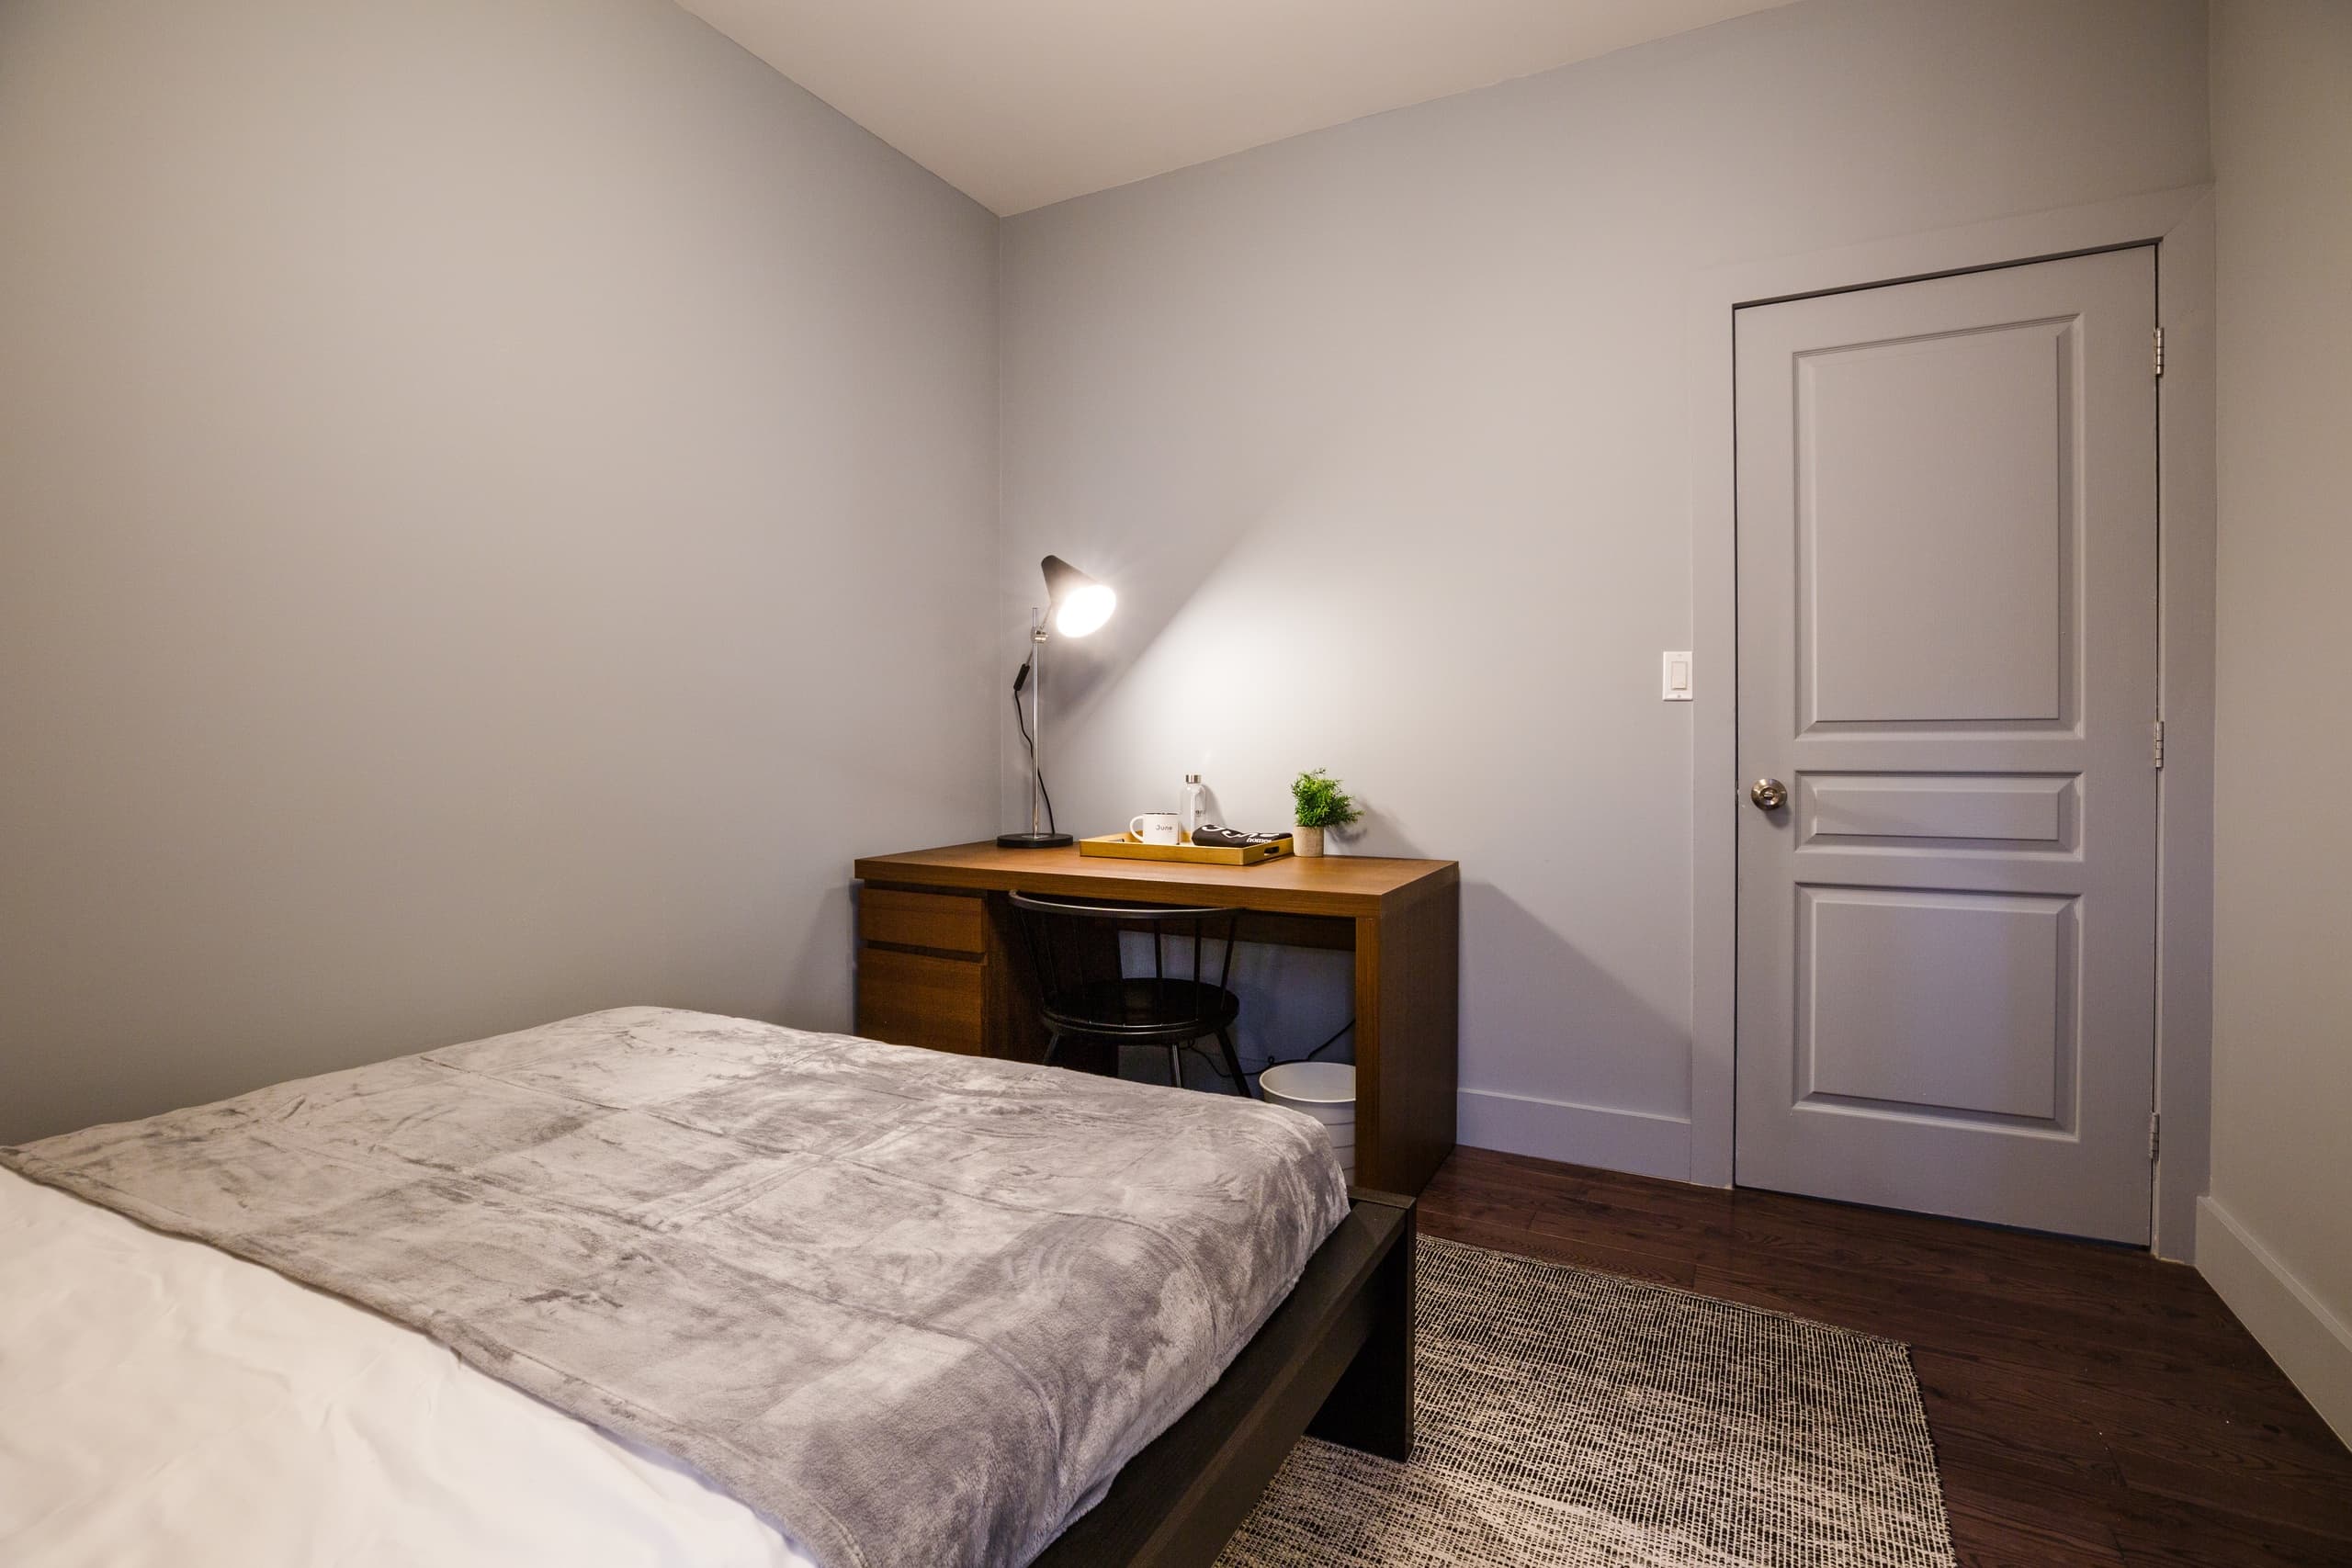 Photo 8 of #473: Queen Bedroom A at June Homes